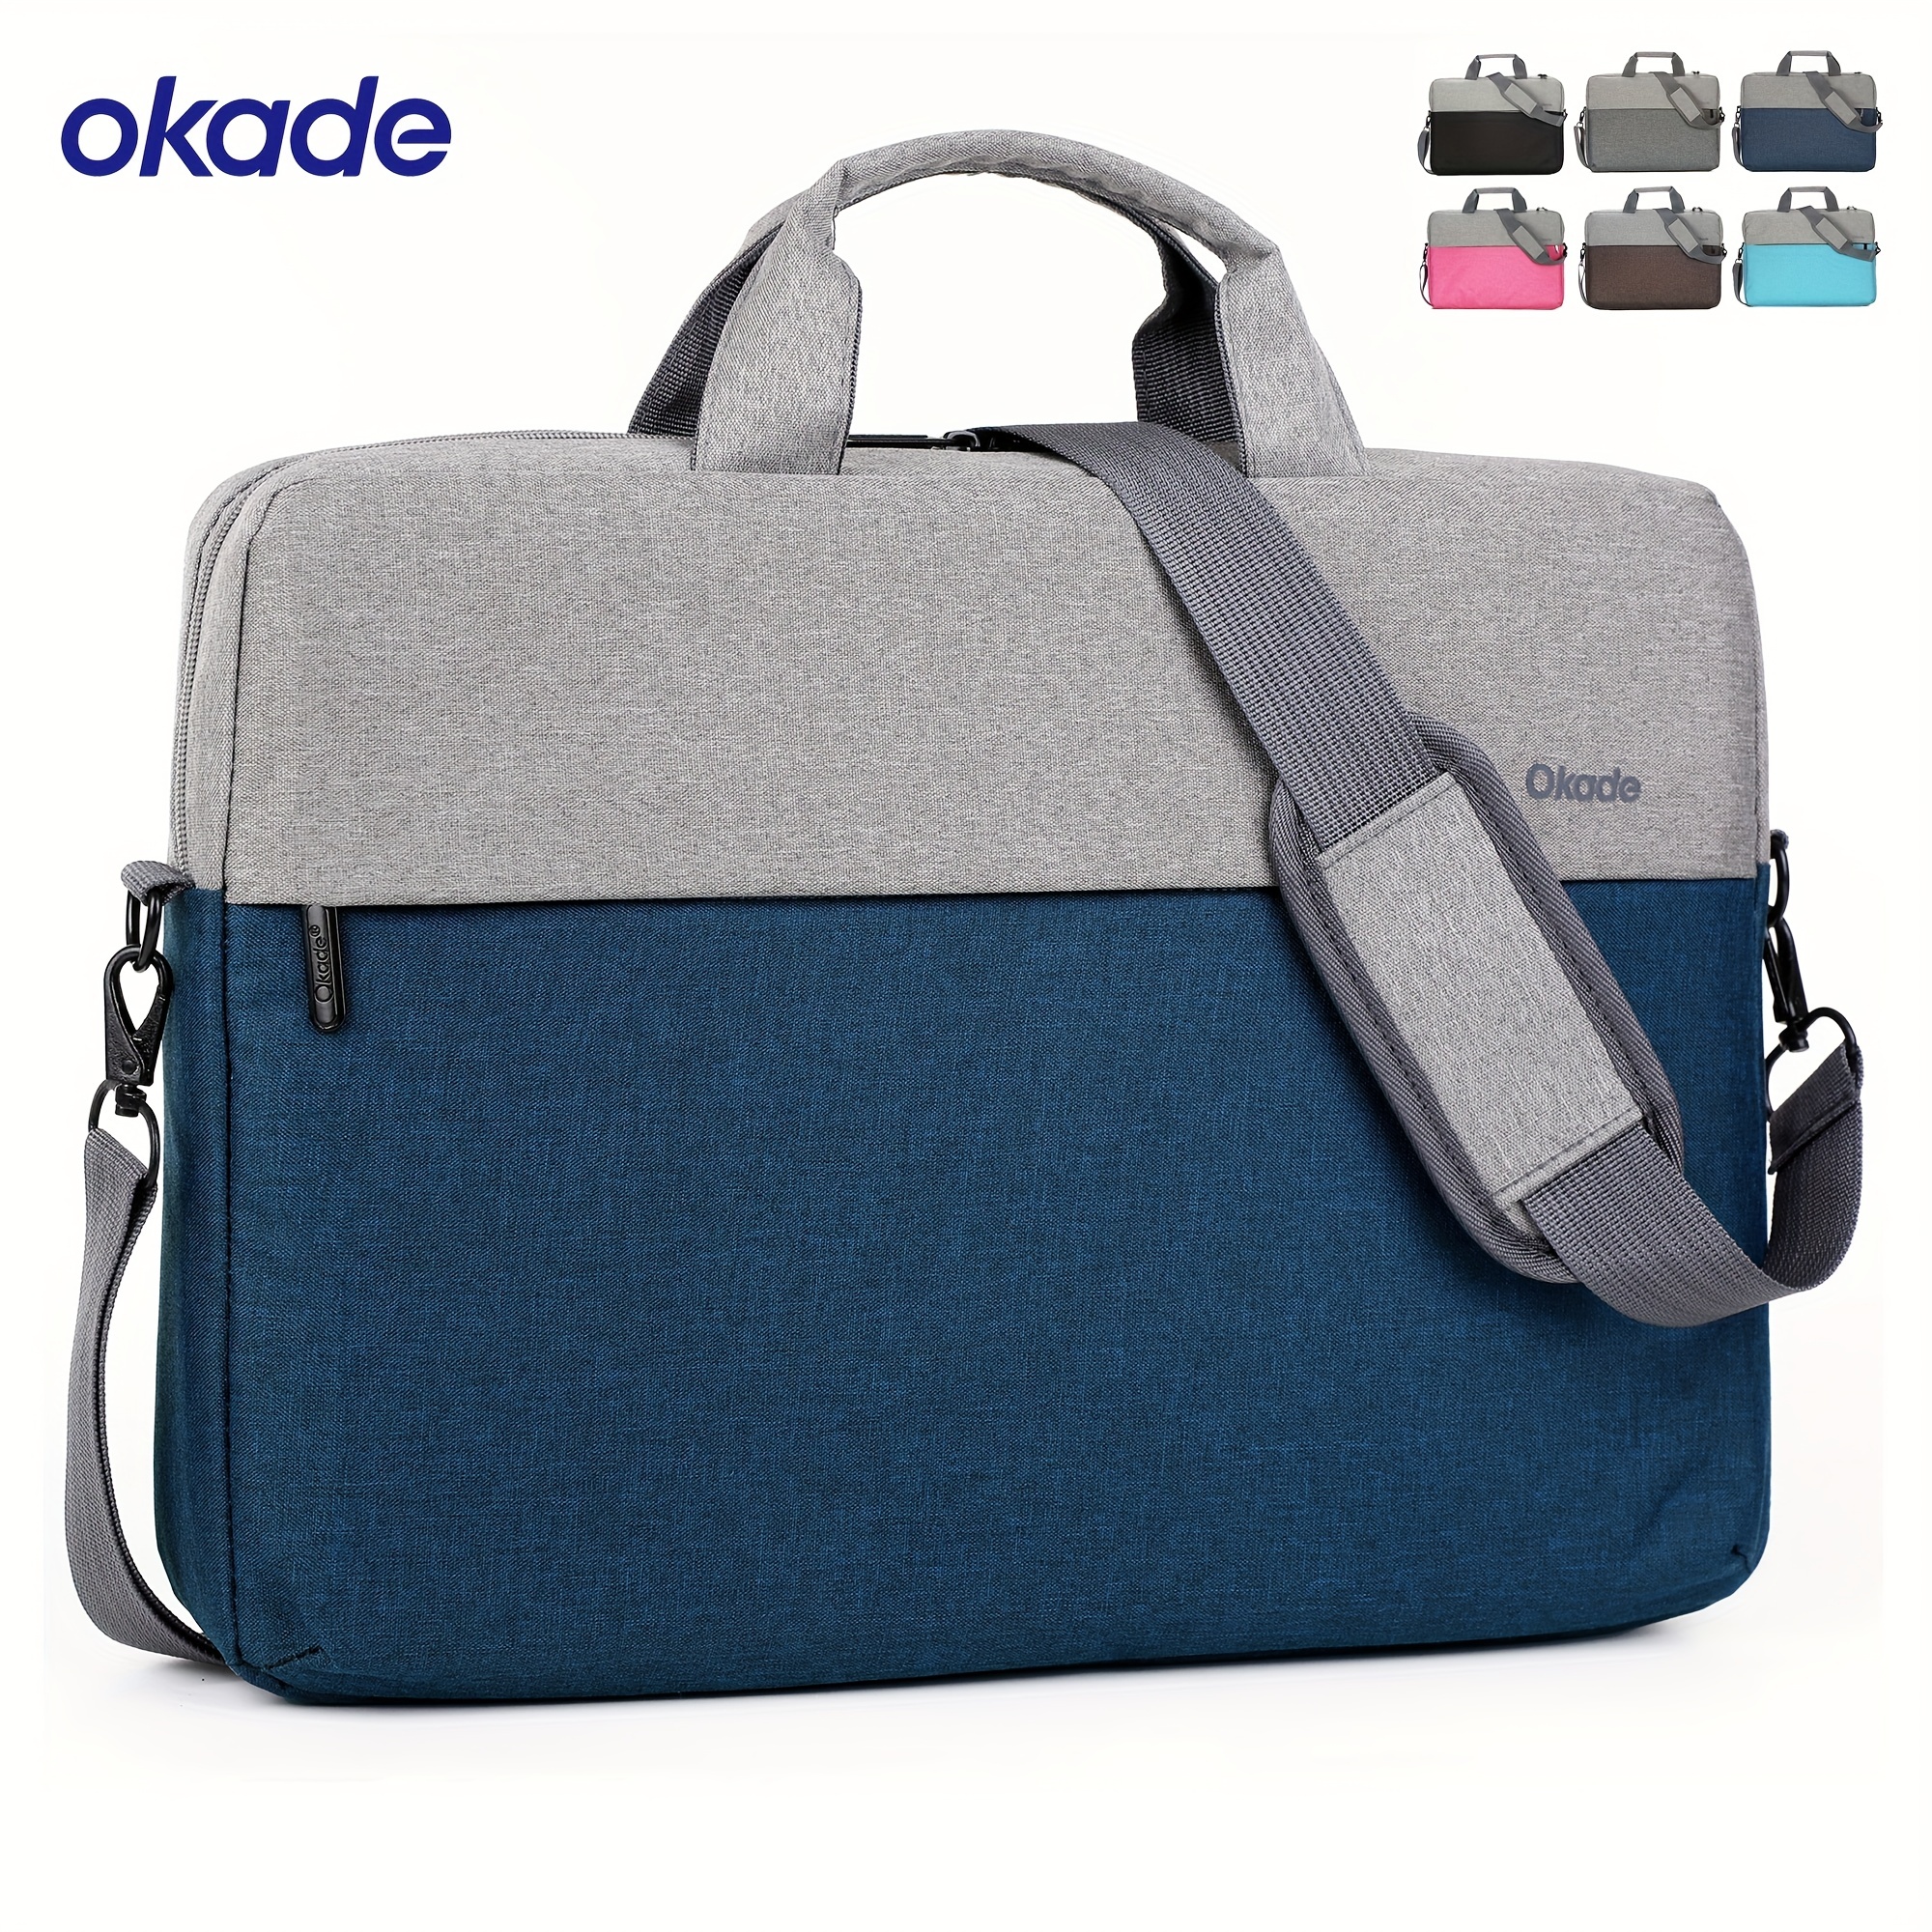 Okade T52 Laptop Portable Shoulder Briefcase, Business Style Bag, Ideal Choice For Gifts, School Bags, Valentines Gifts